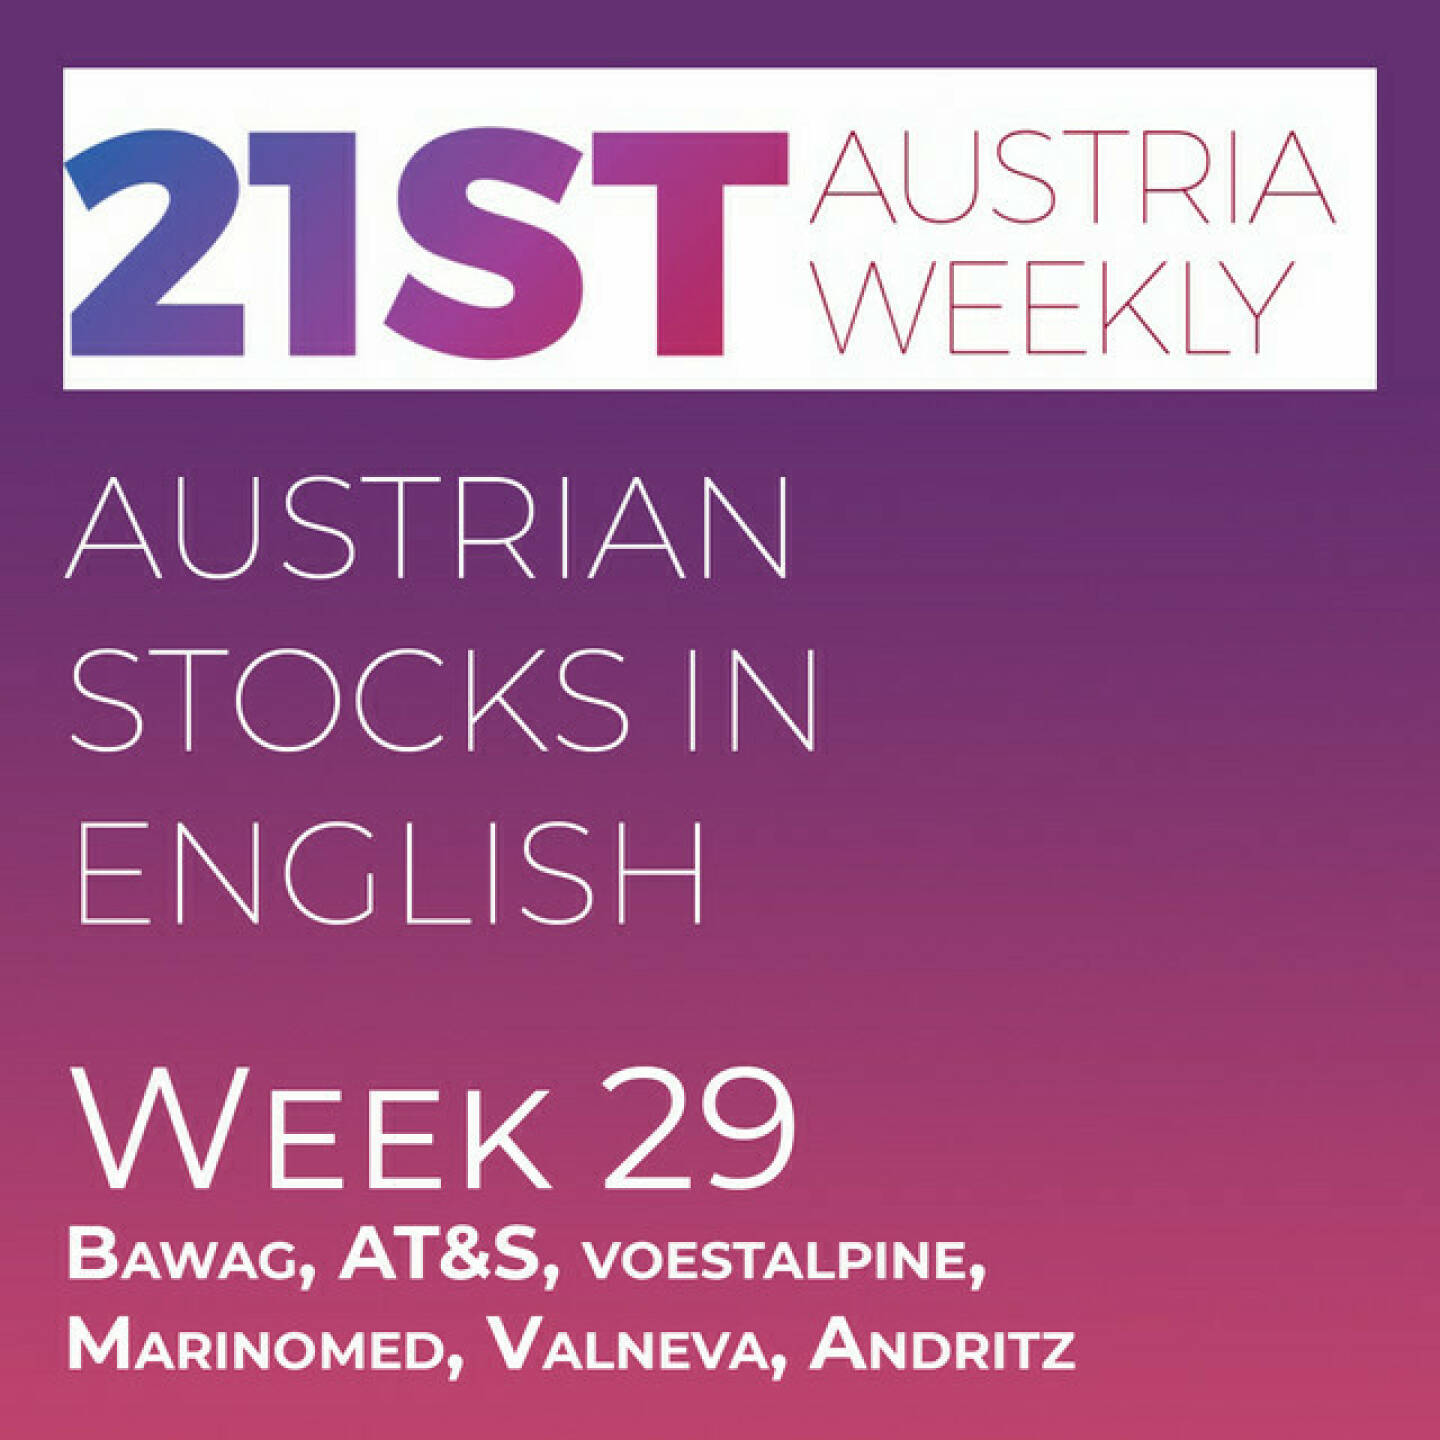 https://open.spotify.com/episode/7uWMHpmhSDdrNyEkpUM0Qf
Austrian Stocks in English, Week 29: Bawag, AT&S, voestalpine, Marinomed, Valneva, Andritz - <p>Welcome to &#34;Austrian Stocks in English - presented by Palfinger&#34;, the new and weekly english spoken Summary for the Austrian Stock Market, positioned every Sunday in the mostly german languaged Podcast &#34;Christian Drastil - Wiener Börse, Sport Musik und mehr&#34; (http://www.christian-drastil.com/podcast). We saw a strong ATX TR this week, the Index gained 2,83% to 6.208.points. Year-to-date the ATX TR is now at minus 20,9%. Best-performers this were were Bawag  with plus 13,65% in front of AT&amp;S plus 10,97% and voestalpine plus 7,53%. And the following stocks performed worst: Marinomed Biotech minus 4,76% in front of Addiko Bank minus 3,32% and Frequentis minus -3,24%. News came from Marinomed, Andritz and Valnvea. Also wie present the last 4 of the 12h Stock Market Tournament. http:///www.boerse-social.com/tournament .</p>